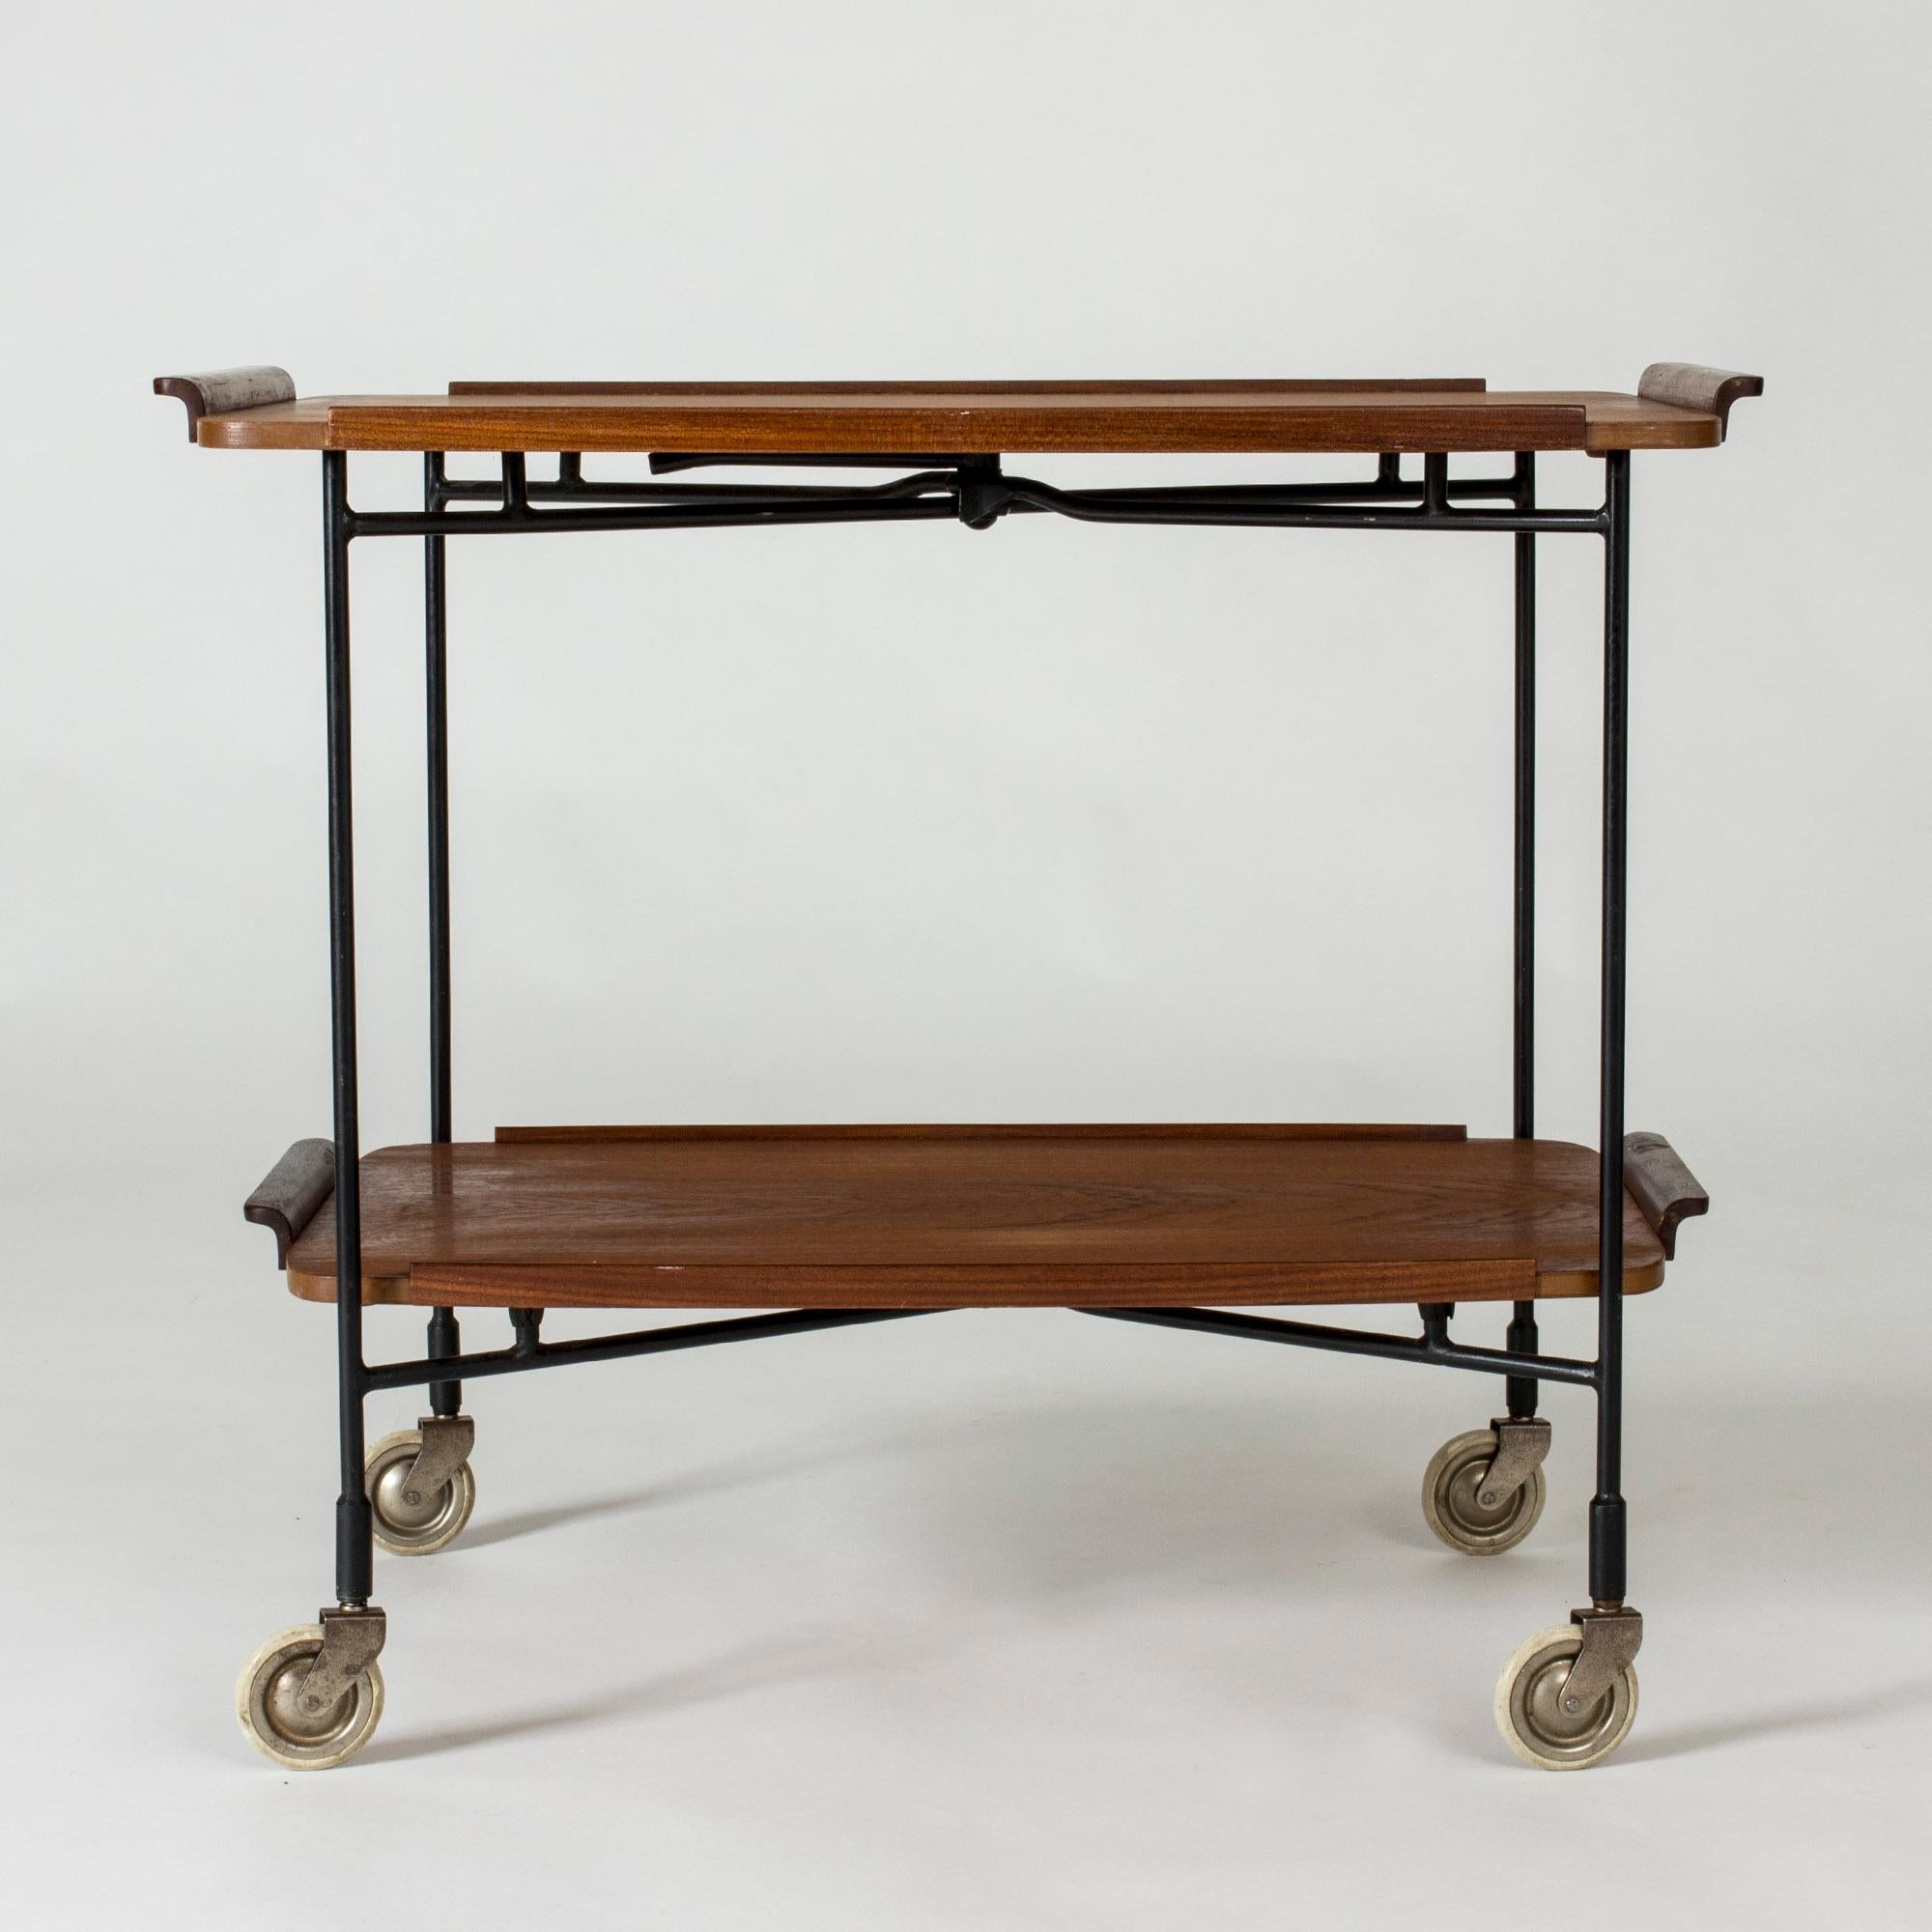 Very cool serving cart from Firma Glas & Trä, made from black lacquered metal and teak. The two teak trays can be lifted off and the cart folded. Elegant details.